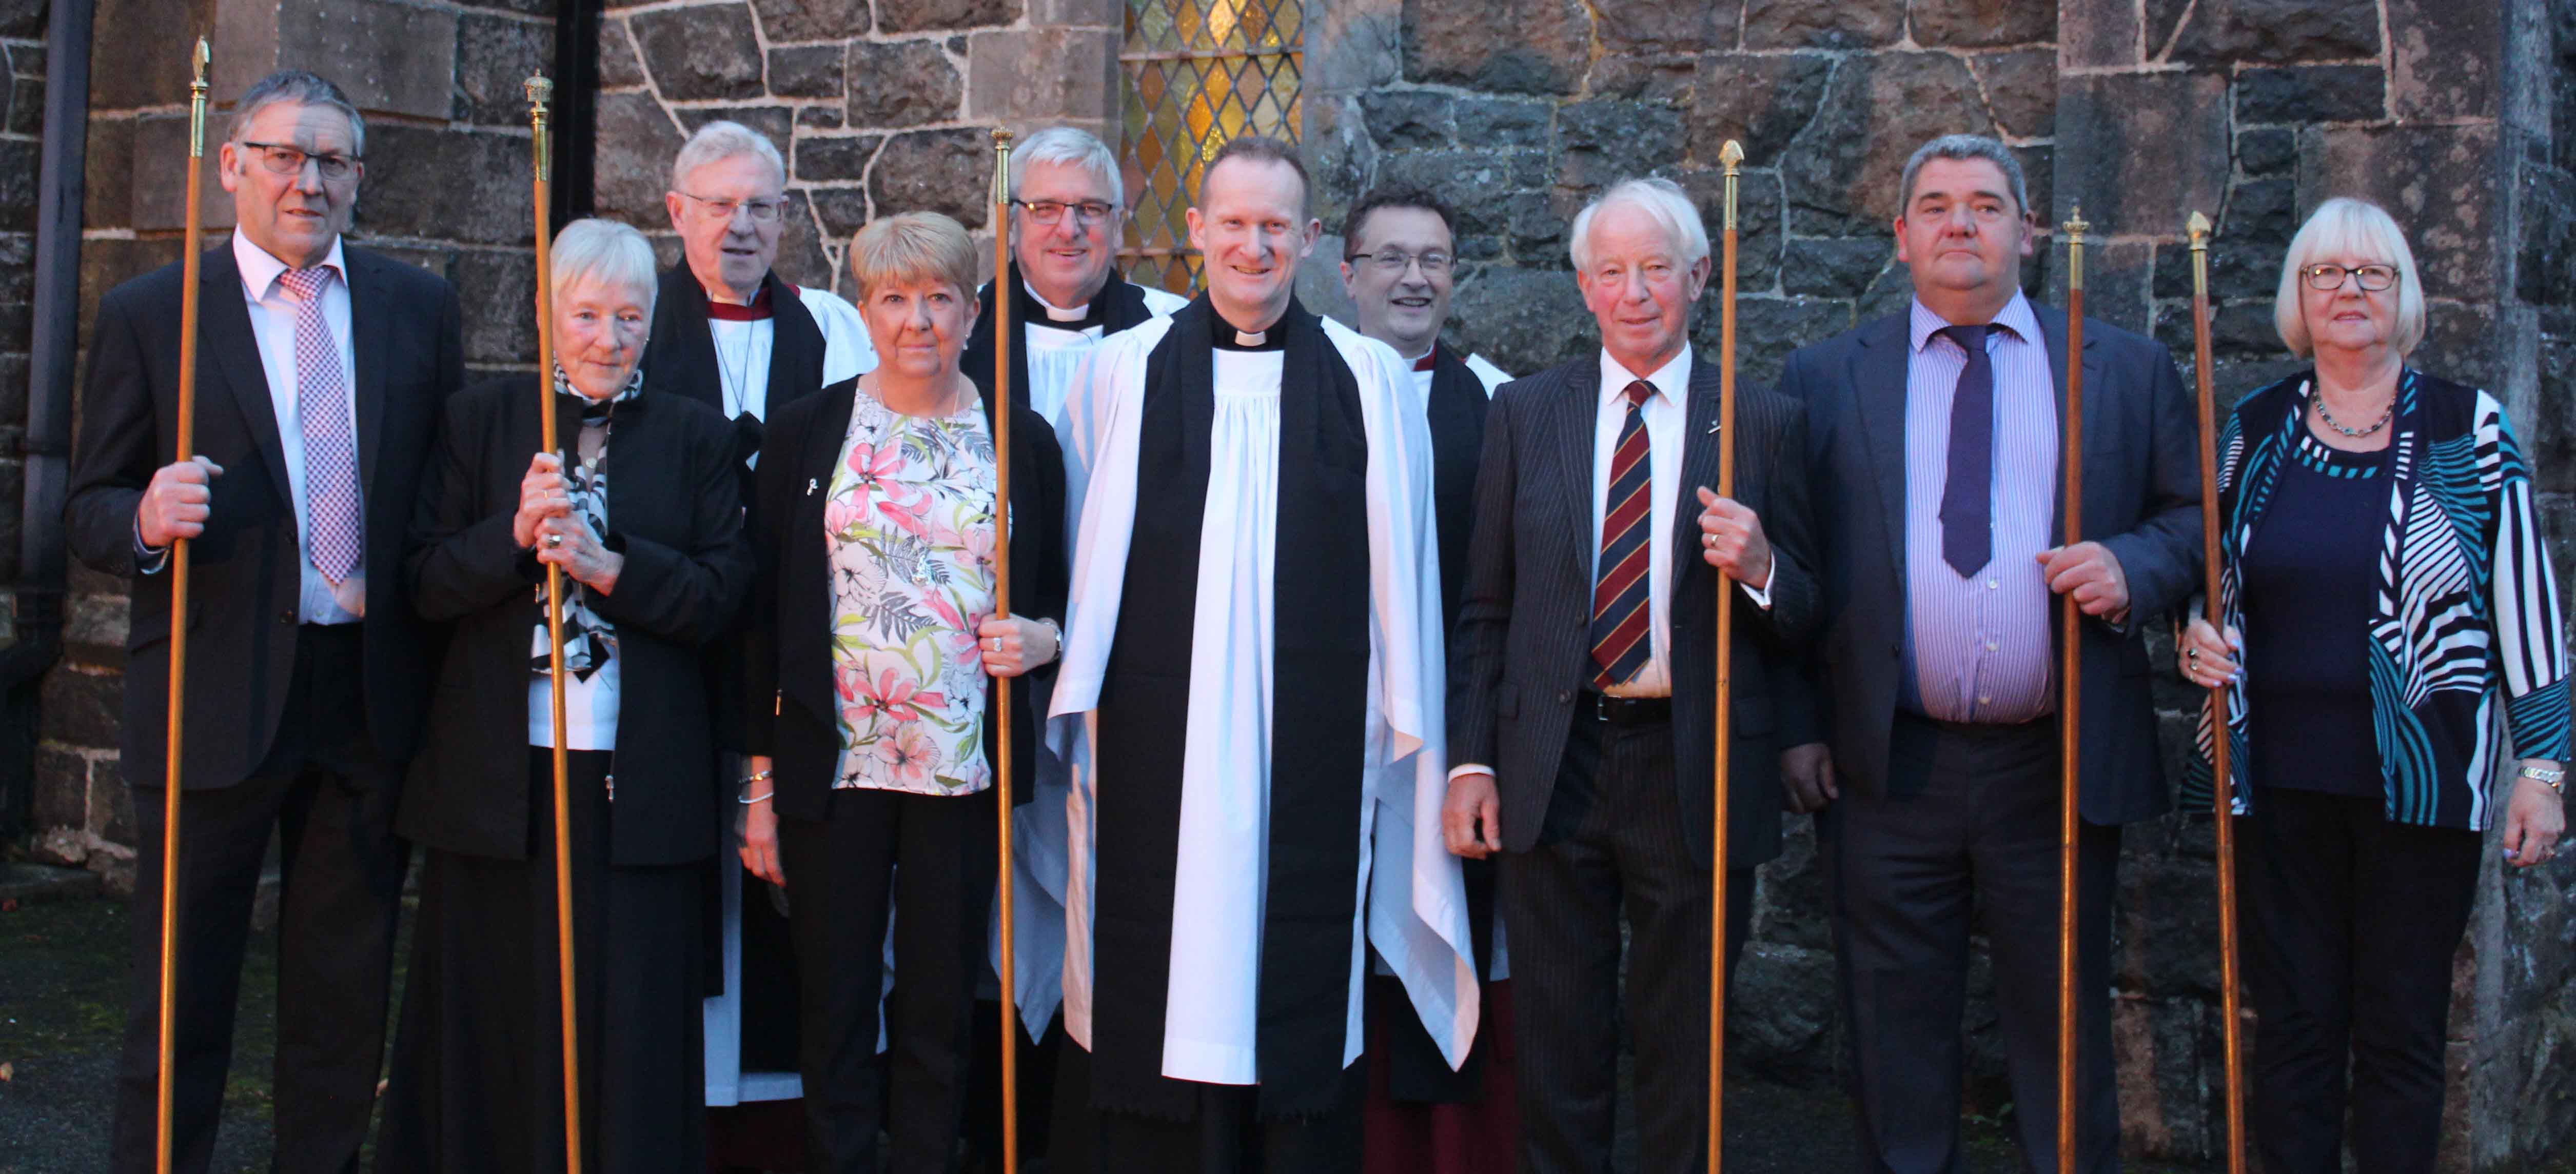 Churchwardens and clergy at the service of introduction of the Rev Adrian Halligan as Curate-in-Charge in Craigs, Dunaghy and Killagan. They are, from left: Jackie Scott, June Davidson, Dean John Bond (preacher), Joyce McLoughlin, the Rev David Ferguson (Rural Dean), the Rev Adrian Halligan, the Ven Paul Dundas (Archdeacon of Dalriada), George Cinnamon, Alistair McCord and Frances Neilly.